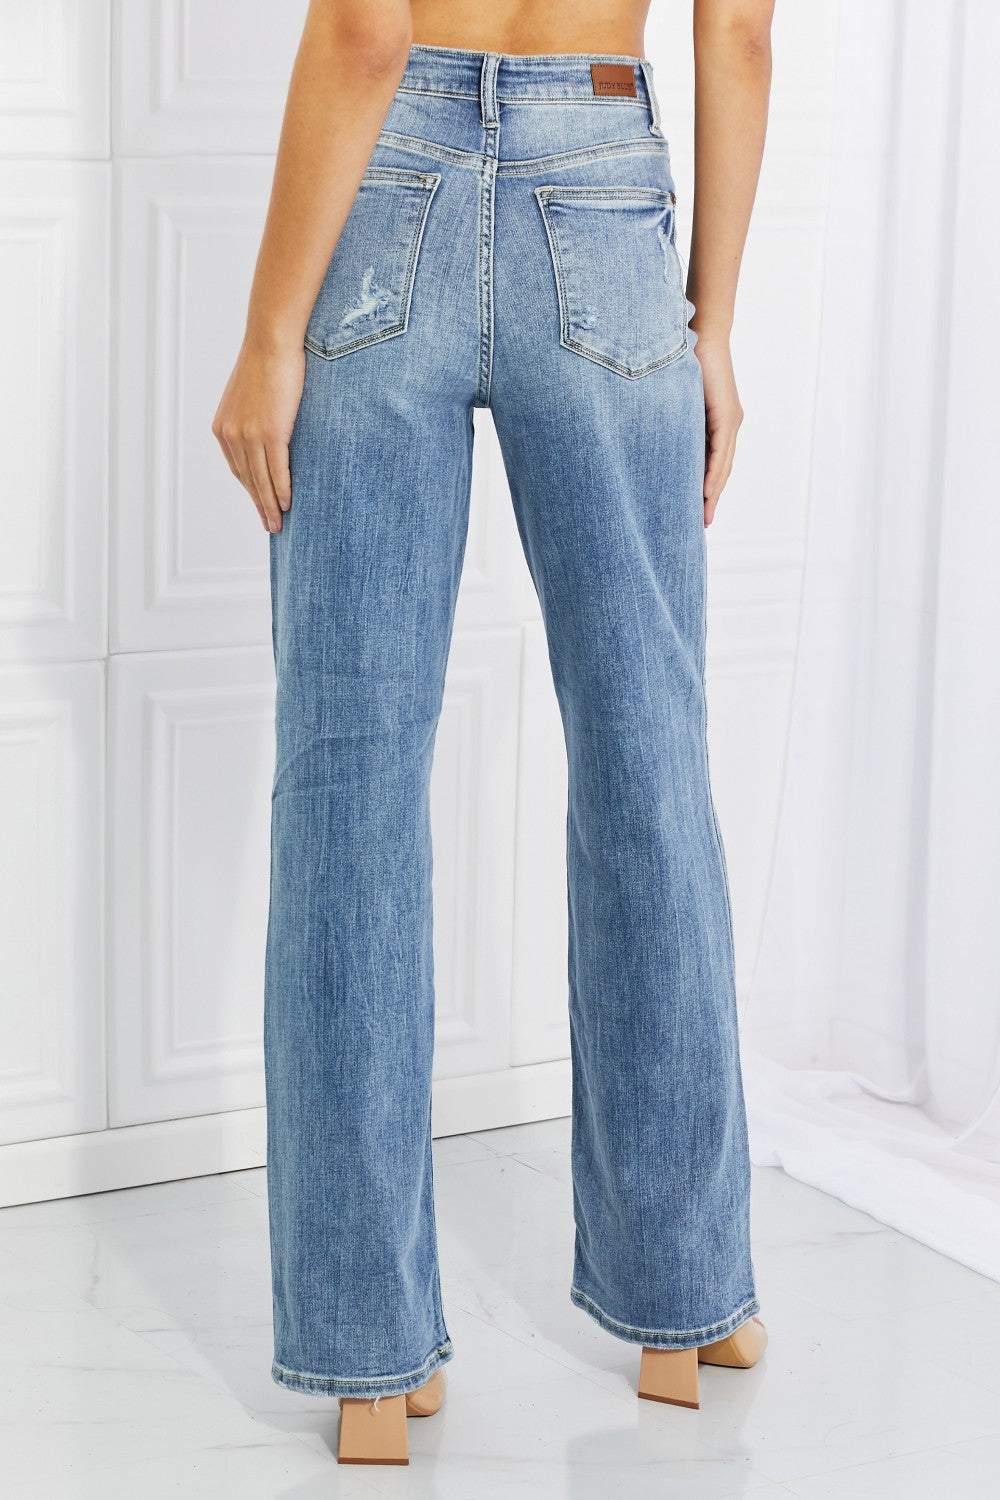 Back View, Judy Blue Full Size Rachel Jeans Style 82407